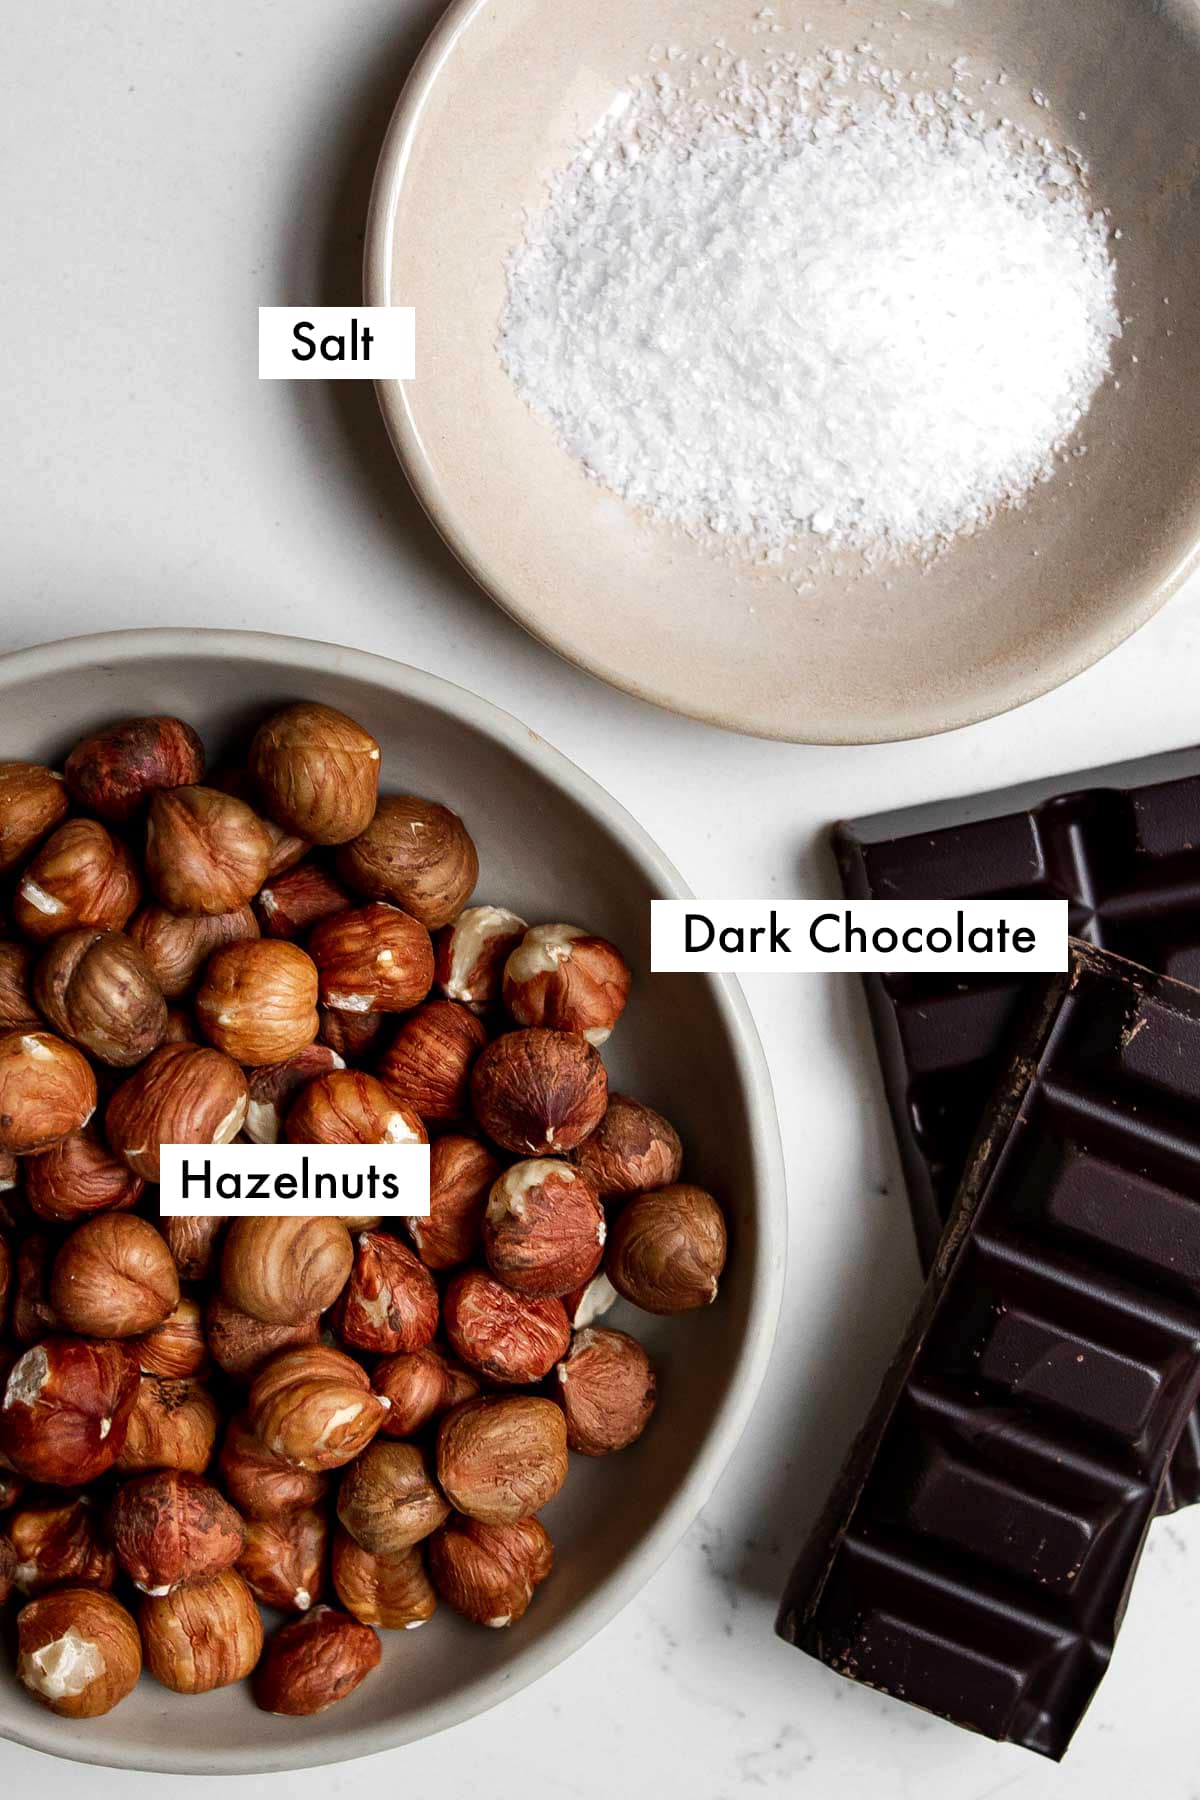 ingredients for chocolate hazelnut spread (homemade nutella) with labelled text.